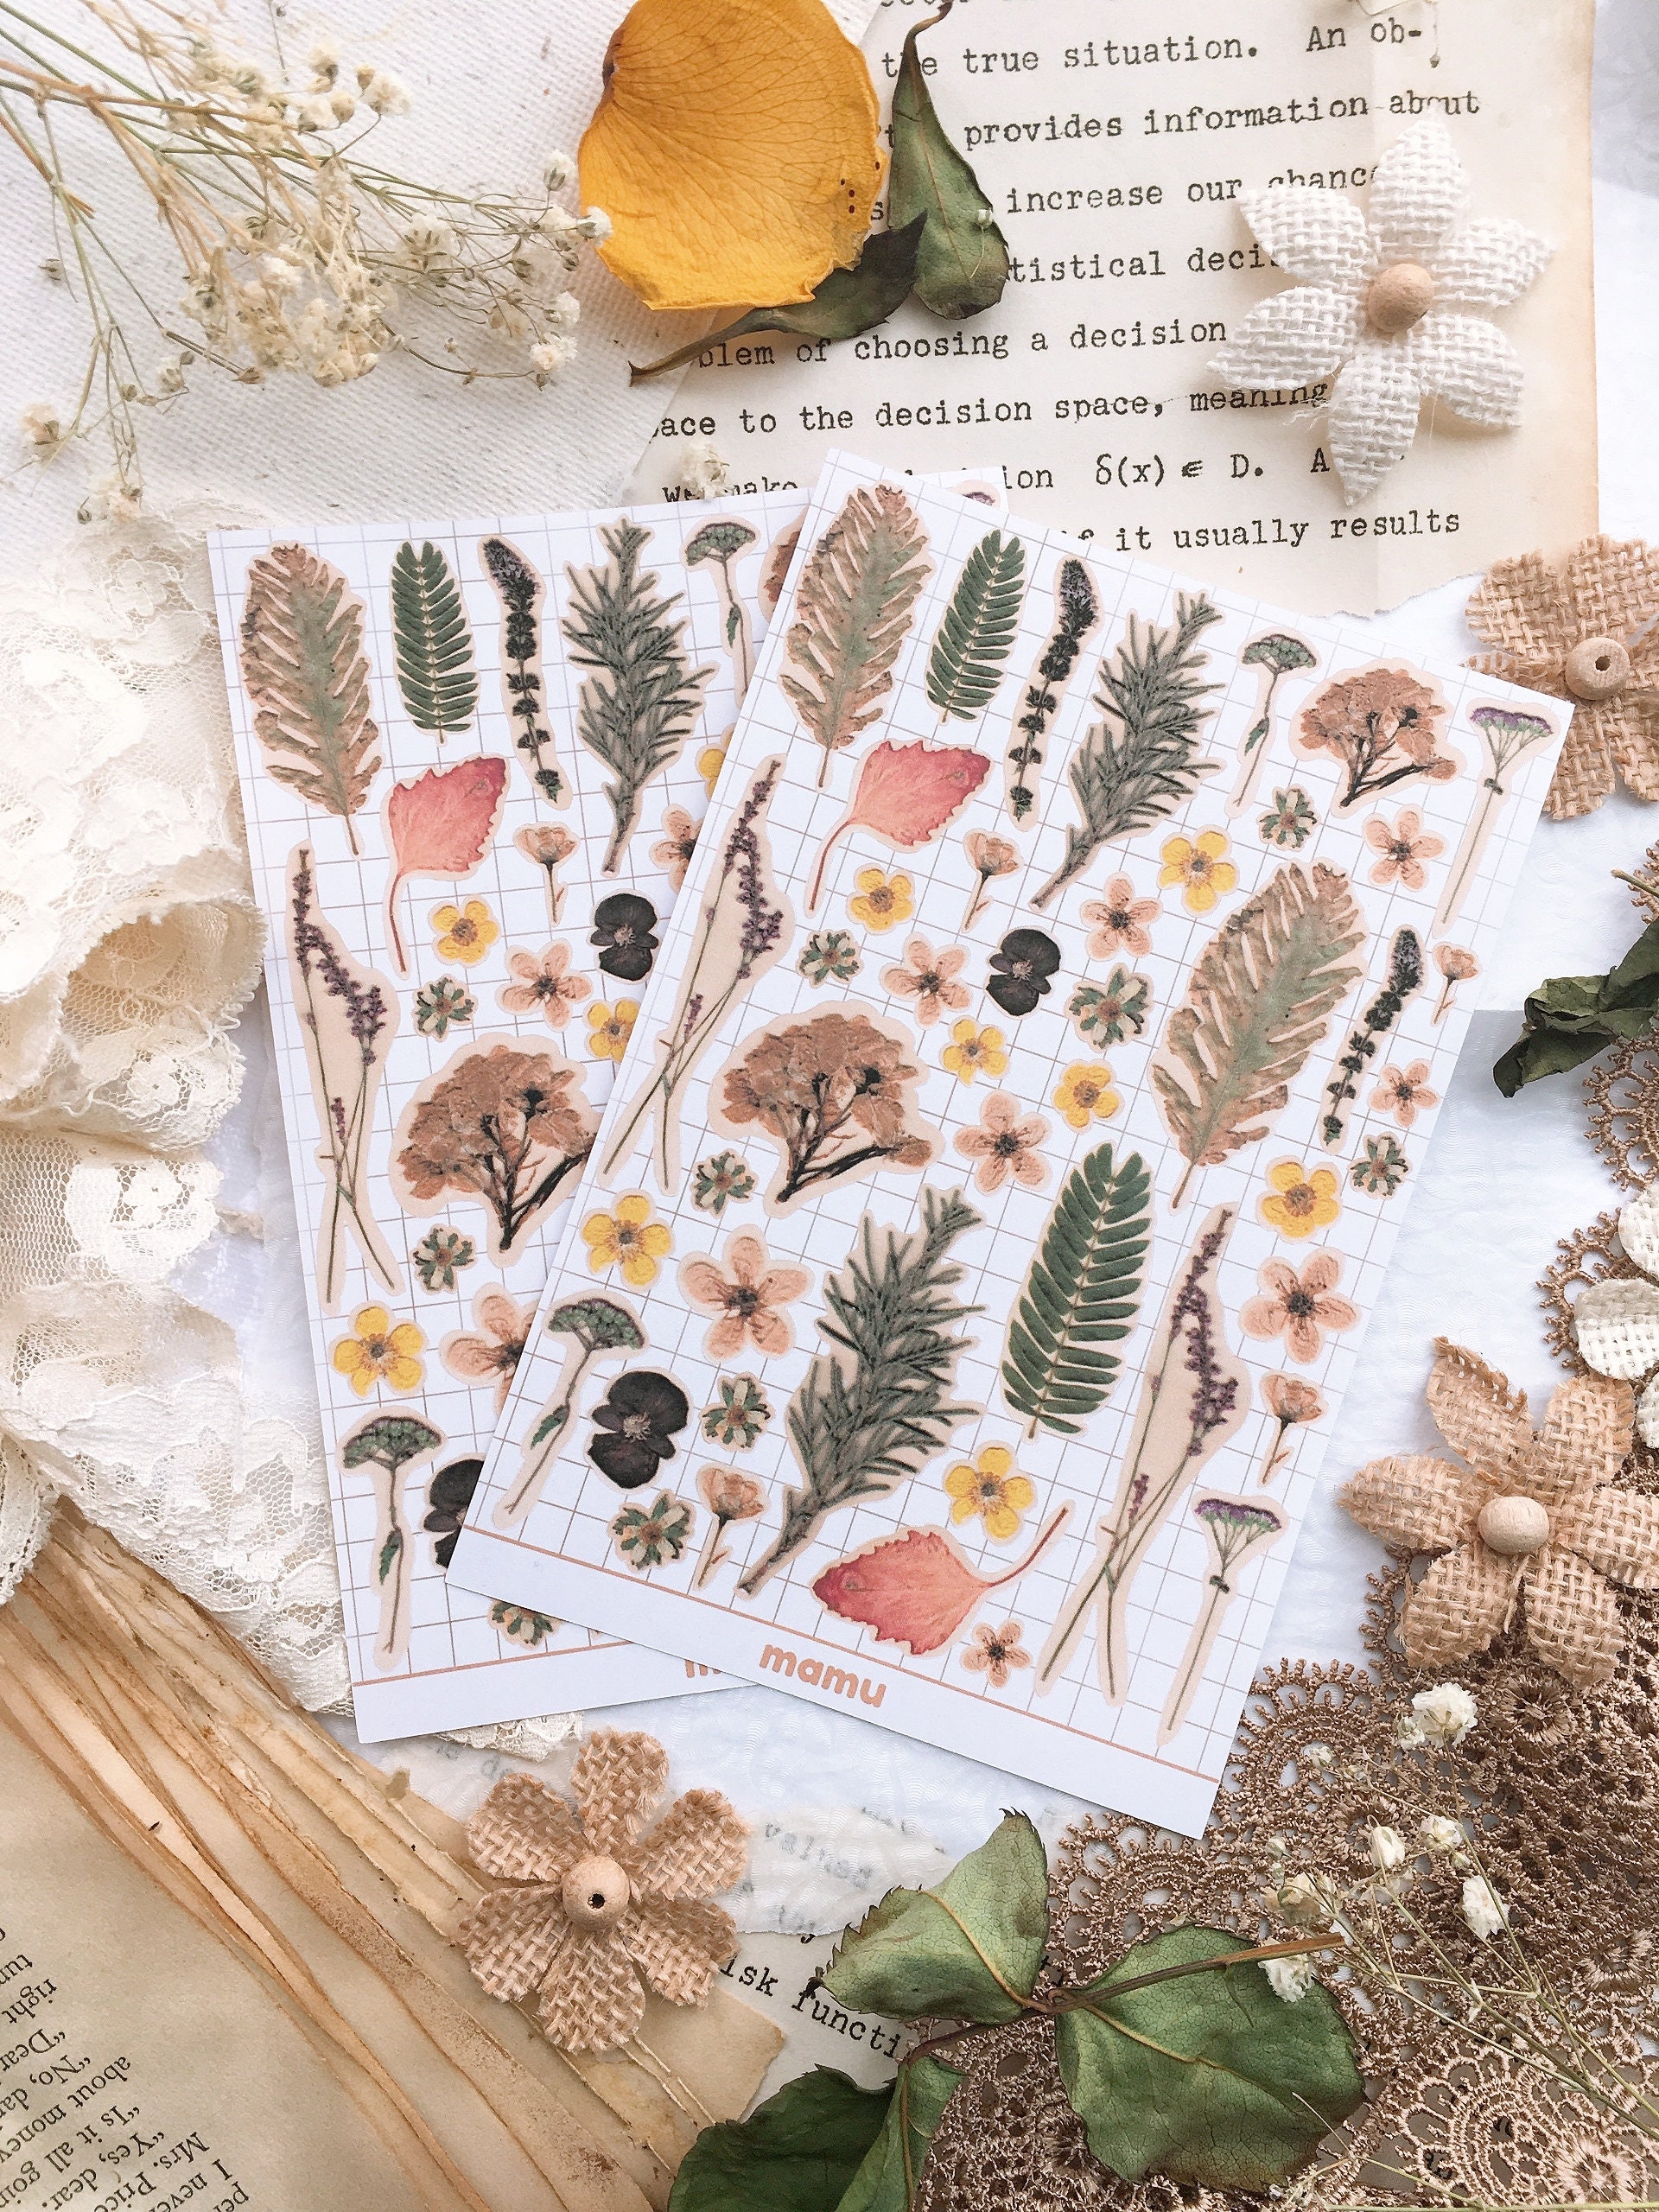 Knaid Botanical Stickers Set (320 Pieces) Pressed Flower Resin Decals